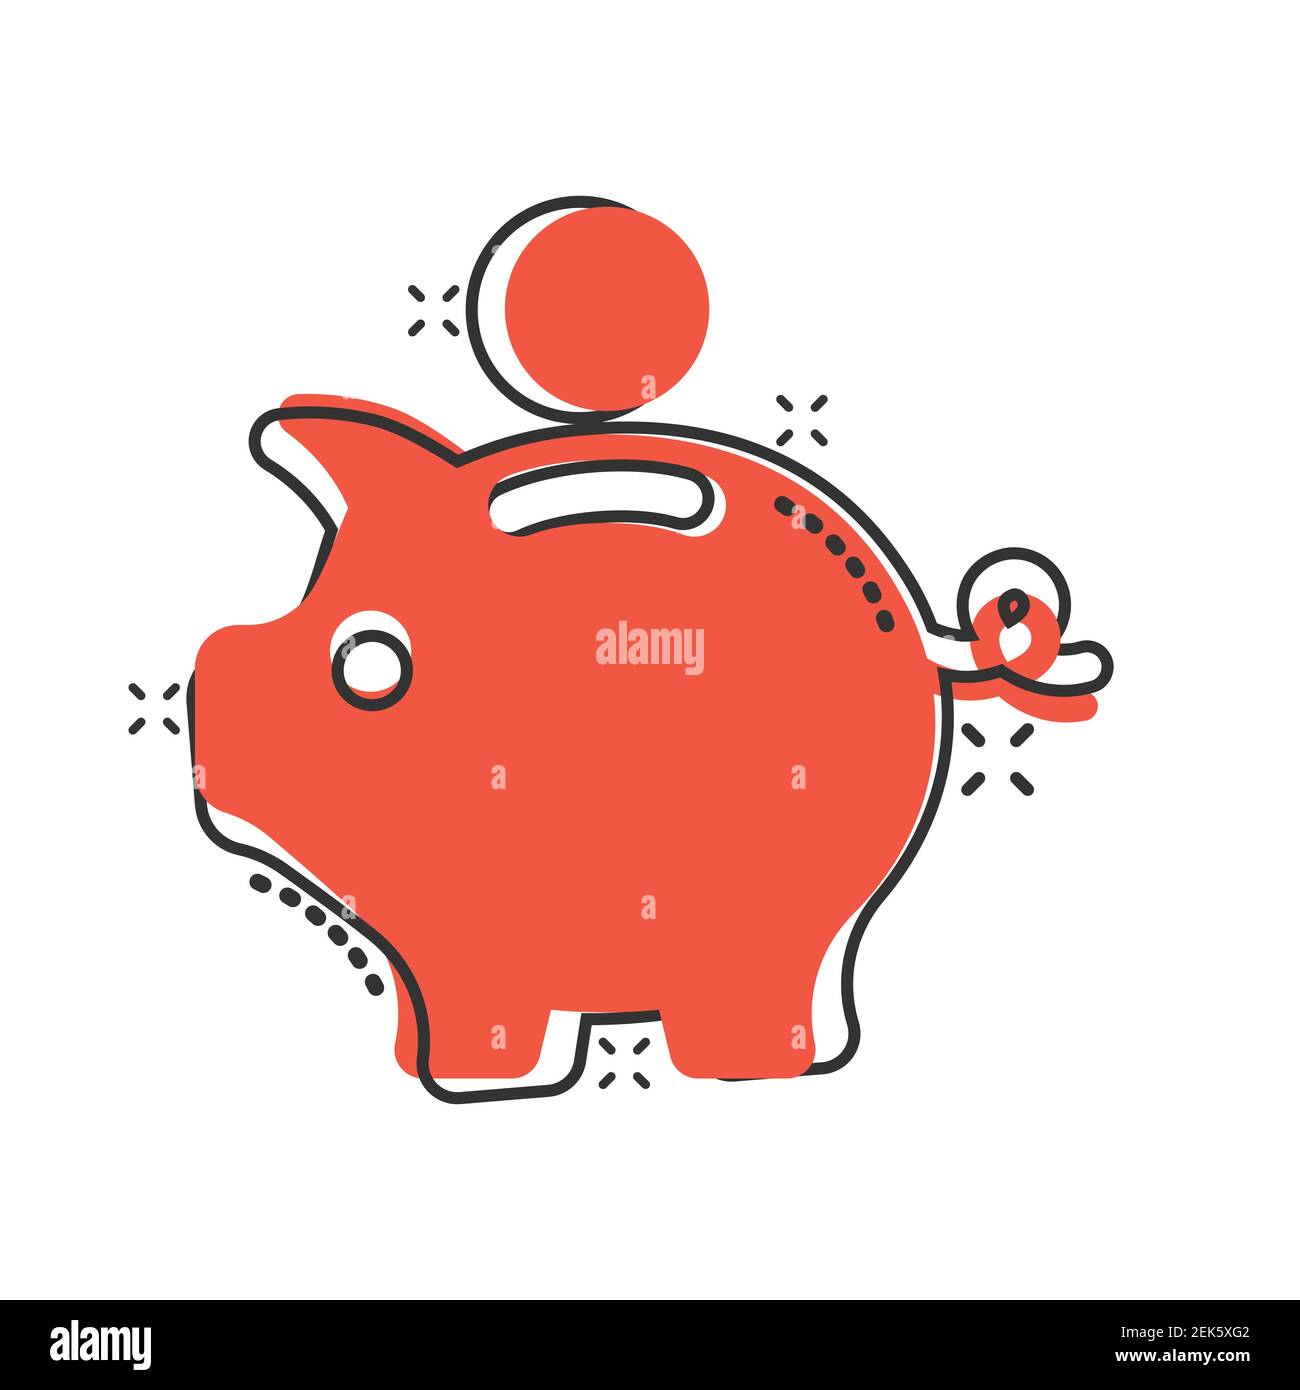 Money box icon in comic style. Pig container cartoon vector illustration on white isolated background. Piggy bank splash effect business concept. Stock Vector